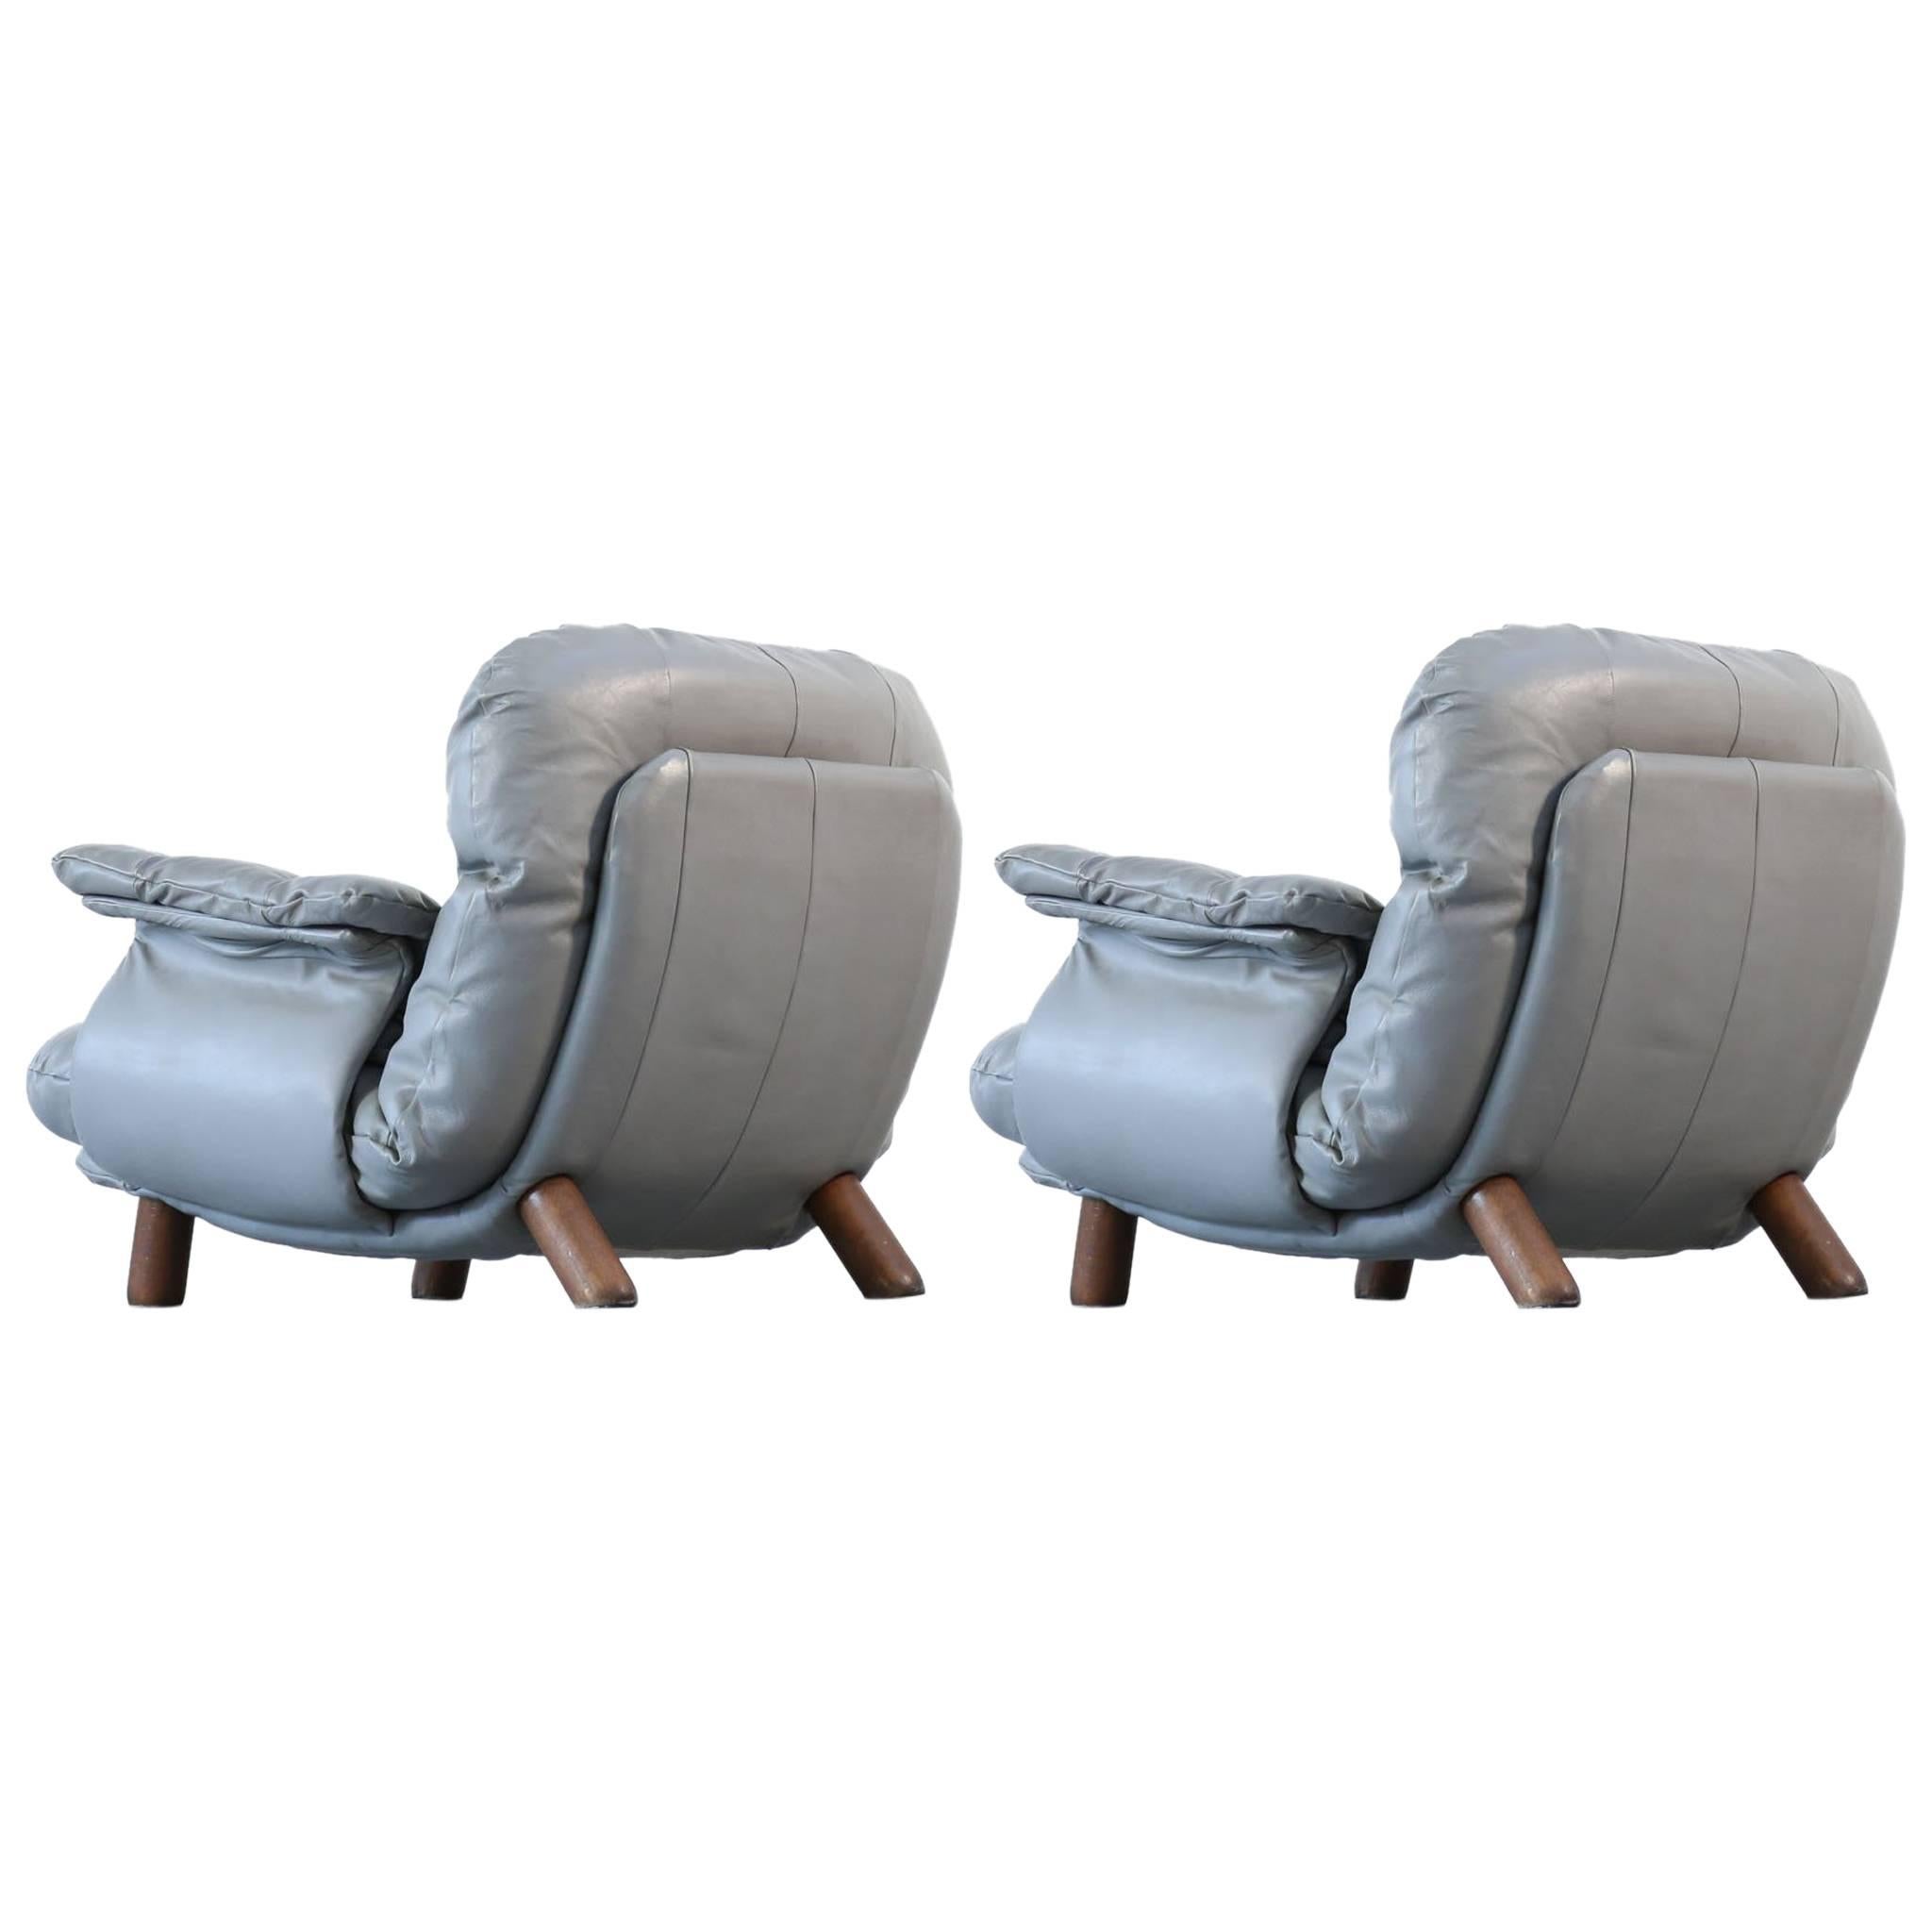 E. Cobianchi lounge chairs in grey leather, excellent condition, 1970s
In the style of Percival Lafer or Sergio Rodrigues